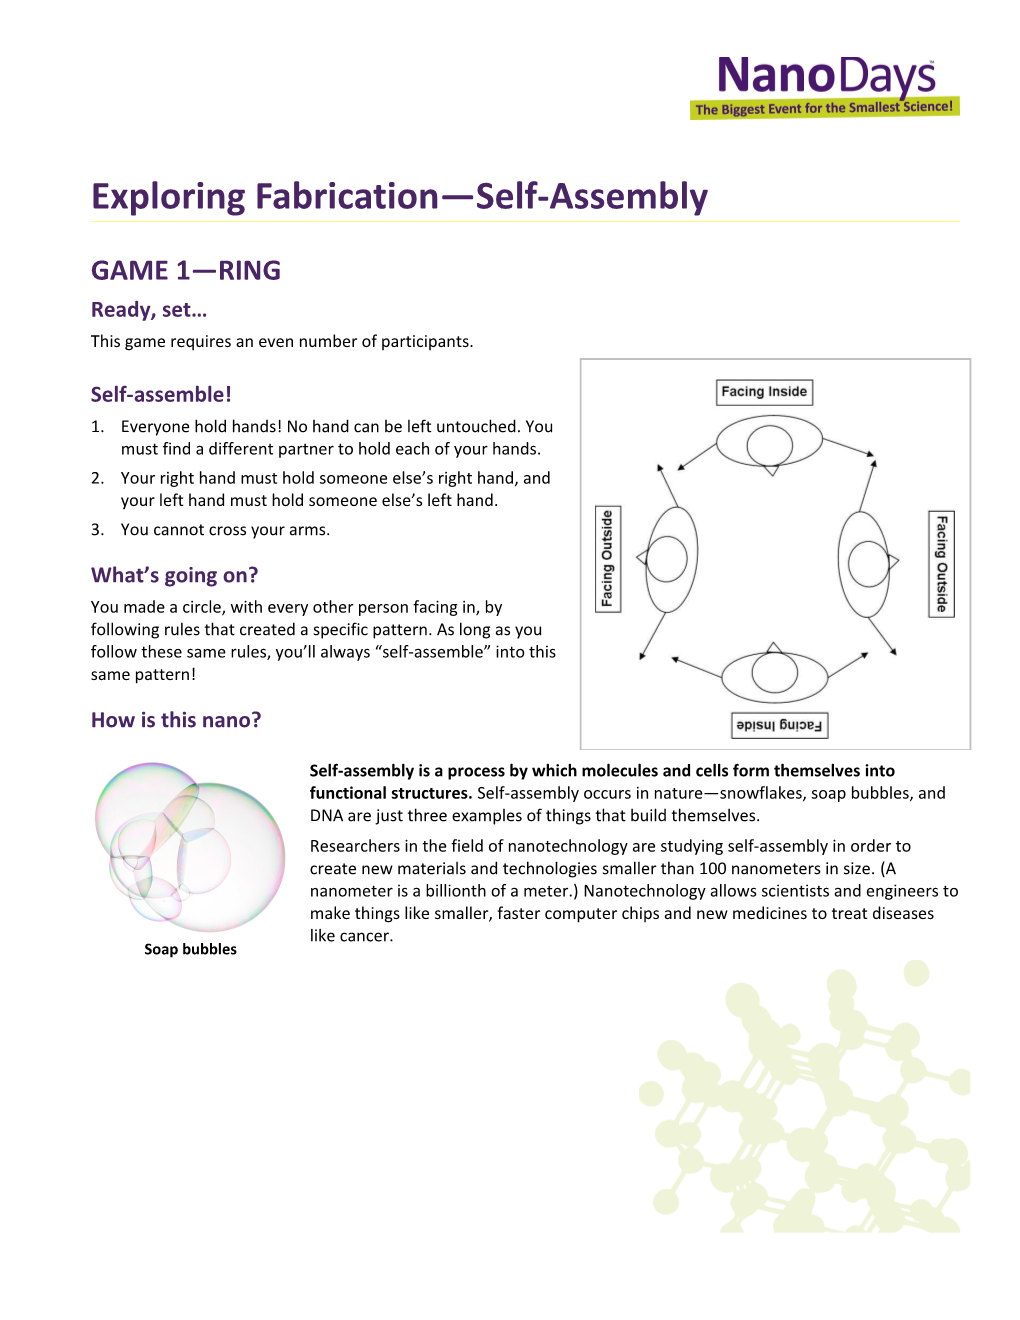 Exploring Fabrication Self-Assembly